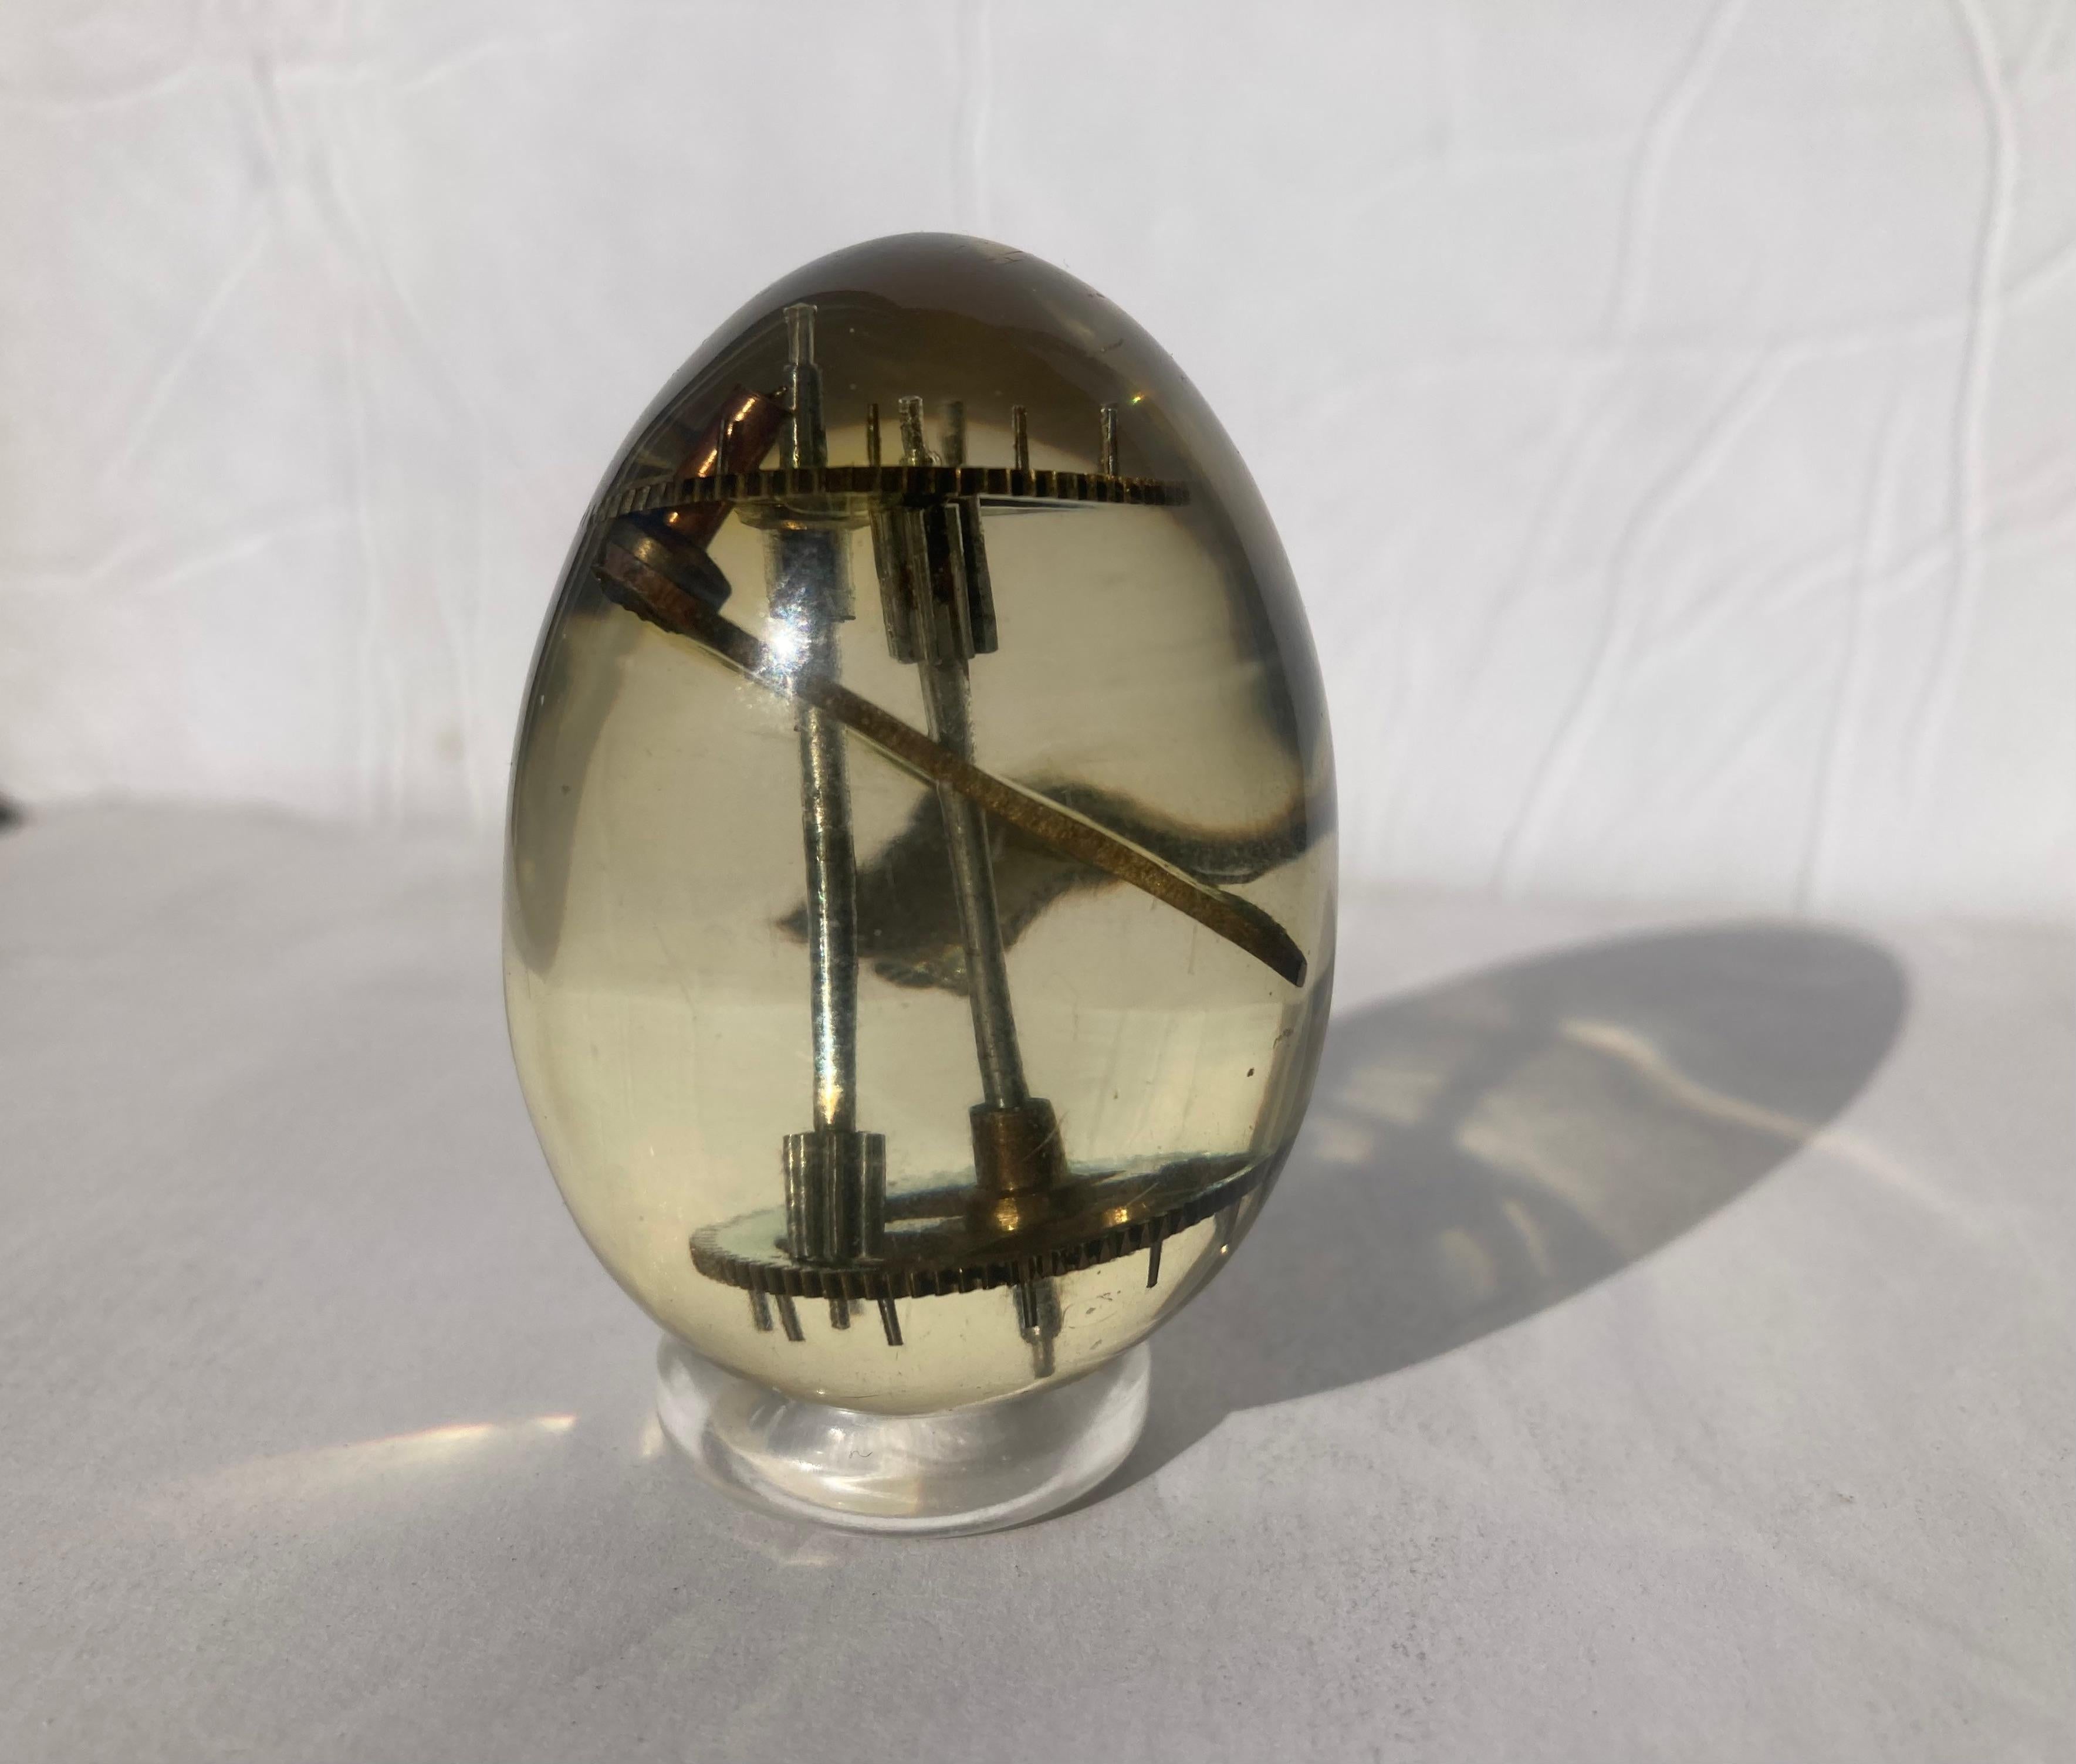 Hand-Crafted Resin Egg with Clock Parts on Pierre GIRAUDON  Sculpture /Ornament / Paperweight For Sale